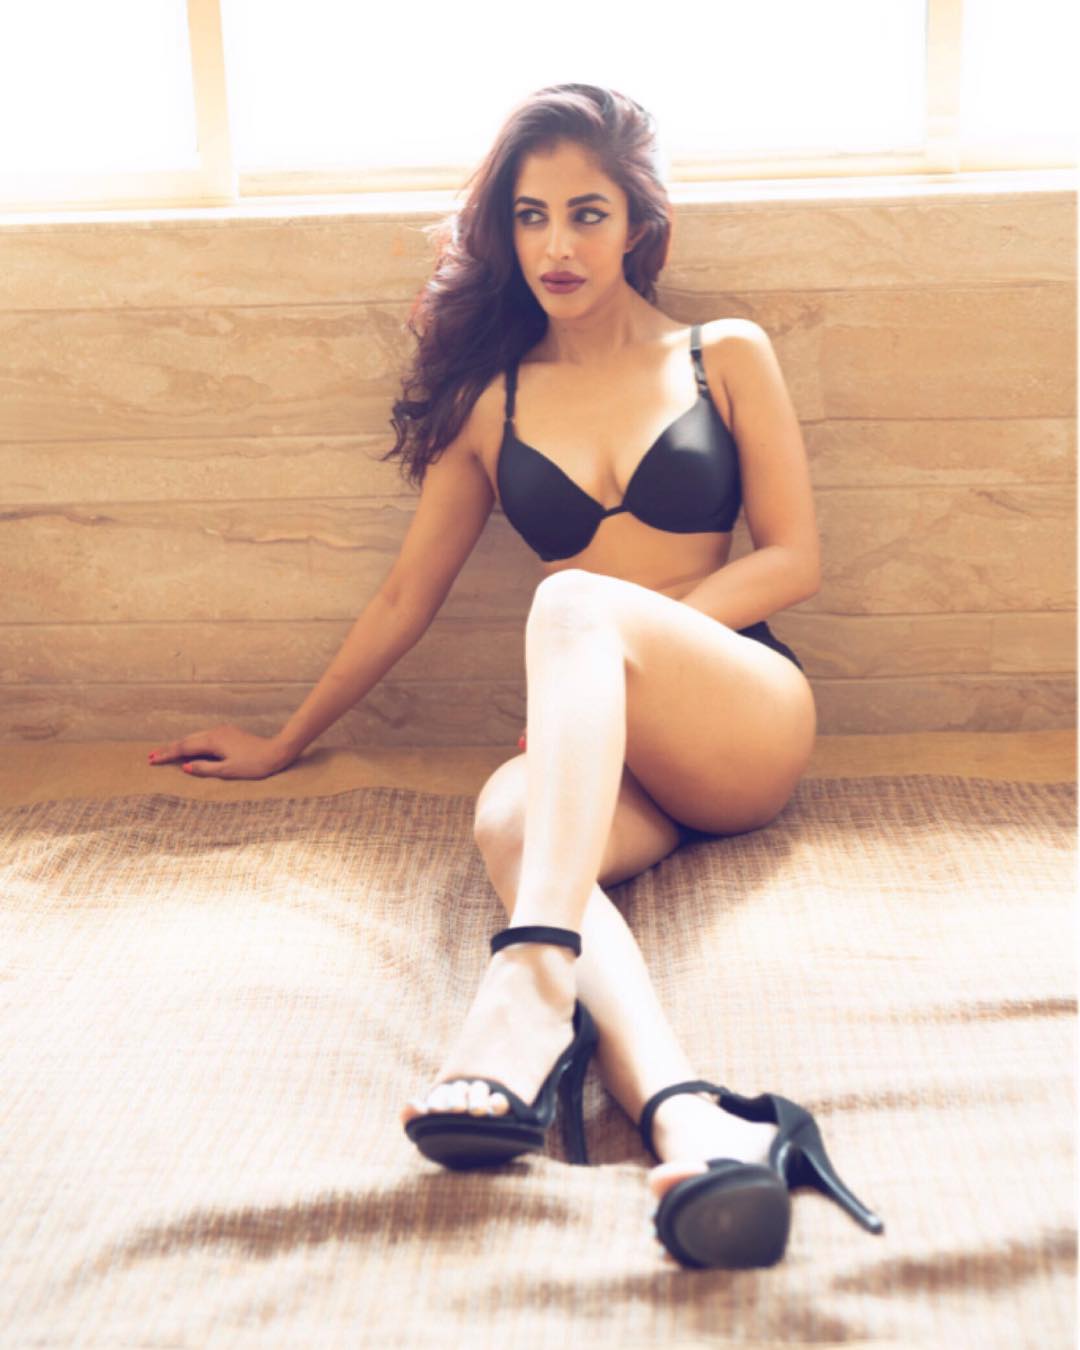 21 hot photos of Priya Banerjee in bikini and sexy outfits - wiki bio, web  series, movies, Instagram and more.